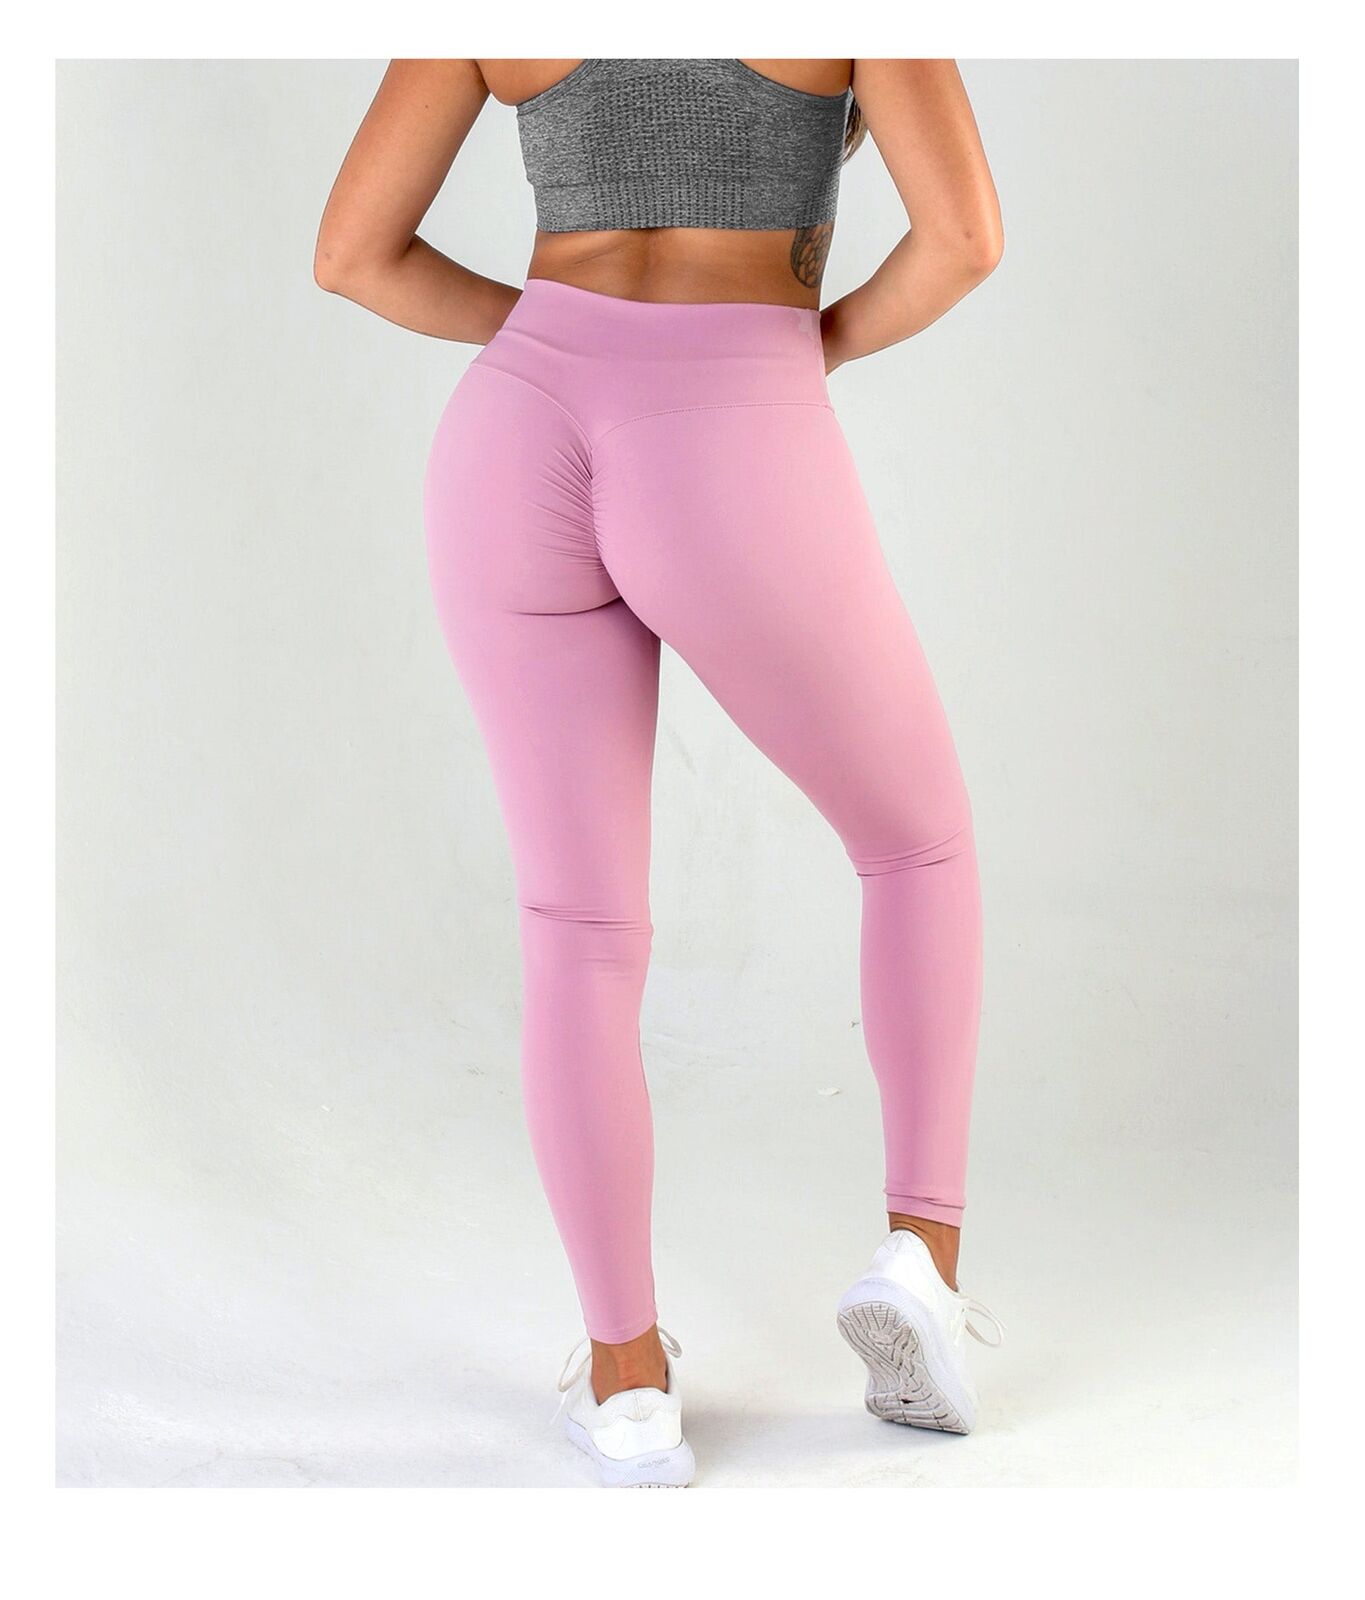 Our Best Selling colors in the NEW Soft Waistband Scrunch Butt Leggings 🤍  Shop now!